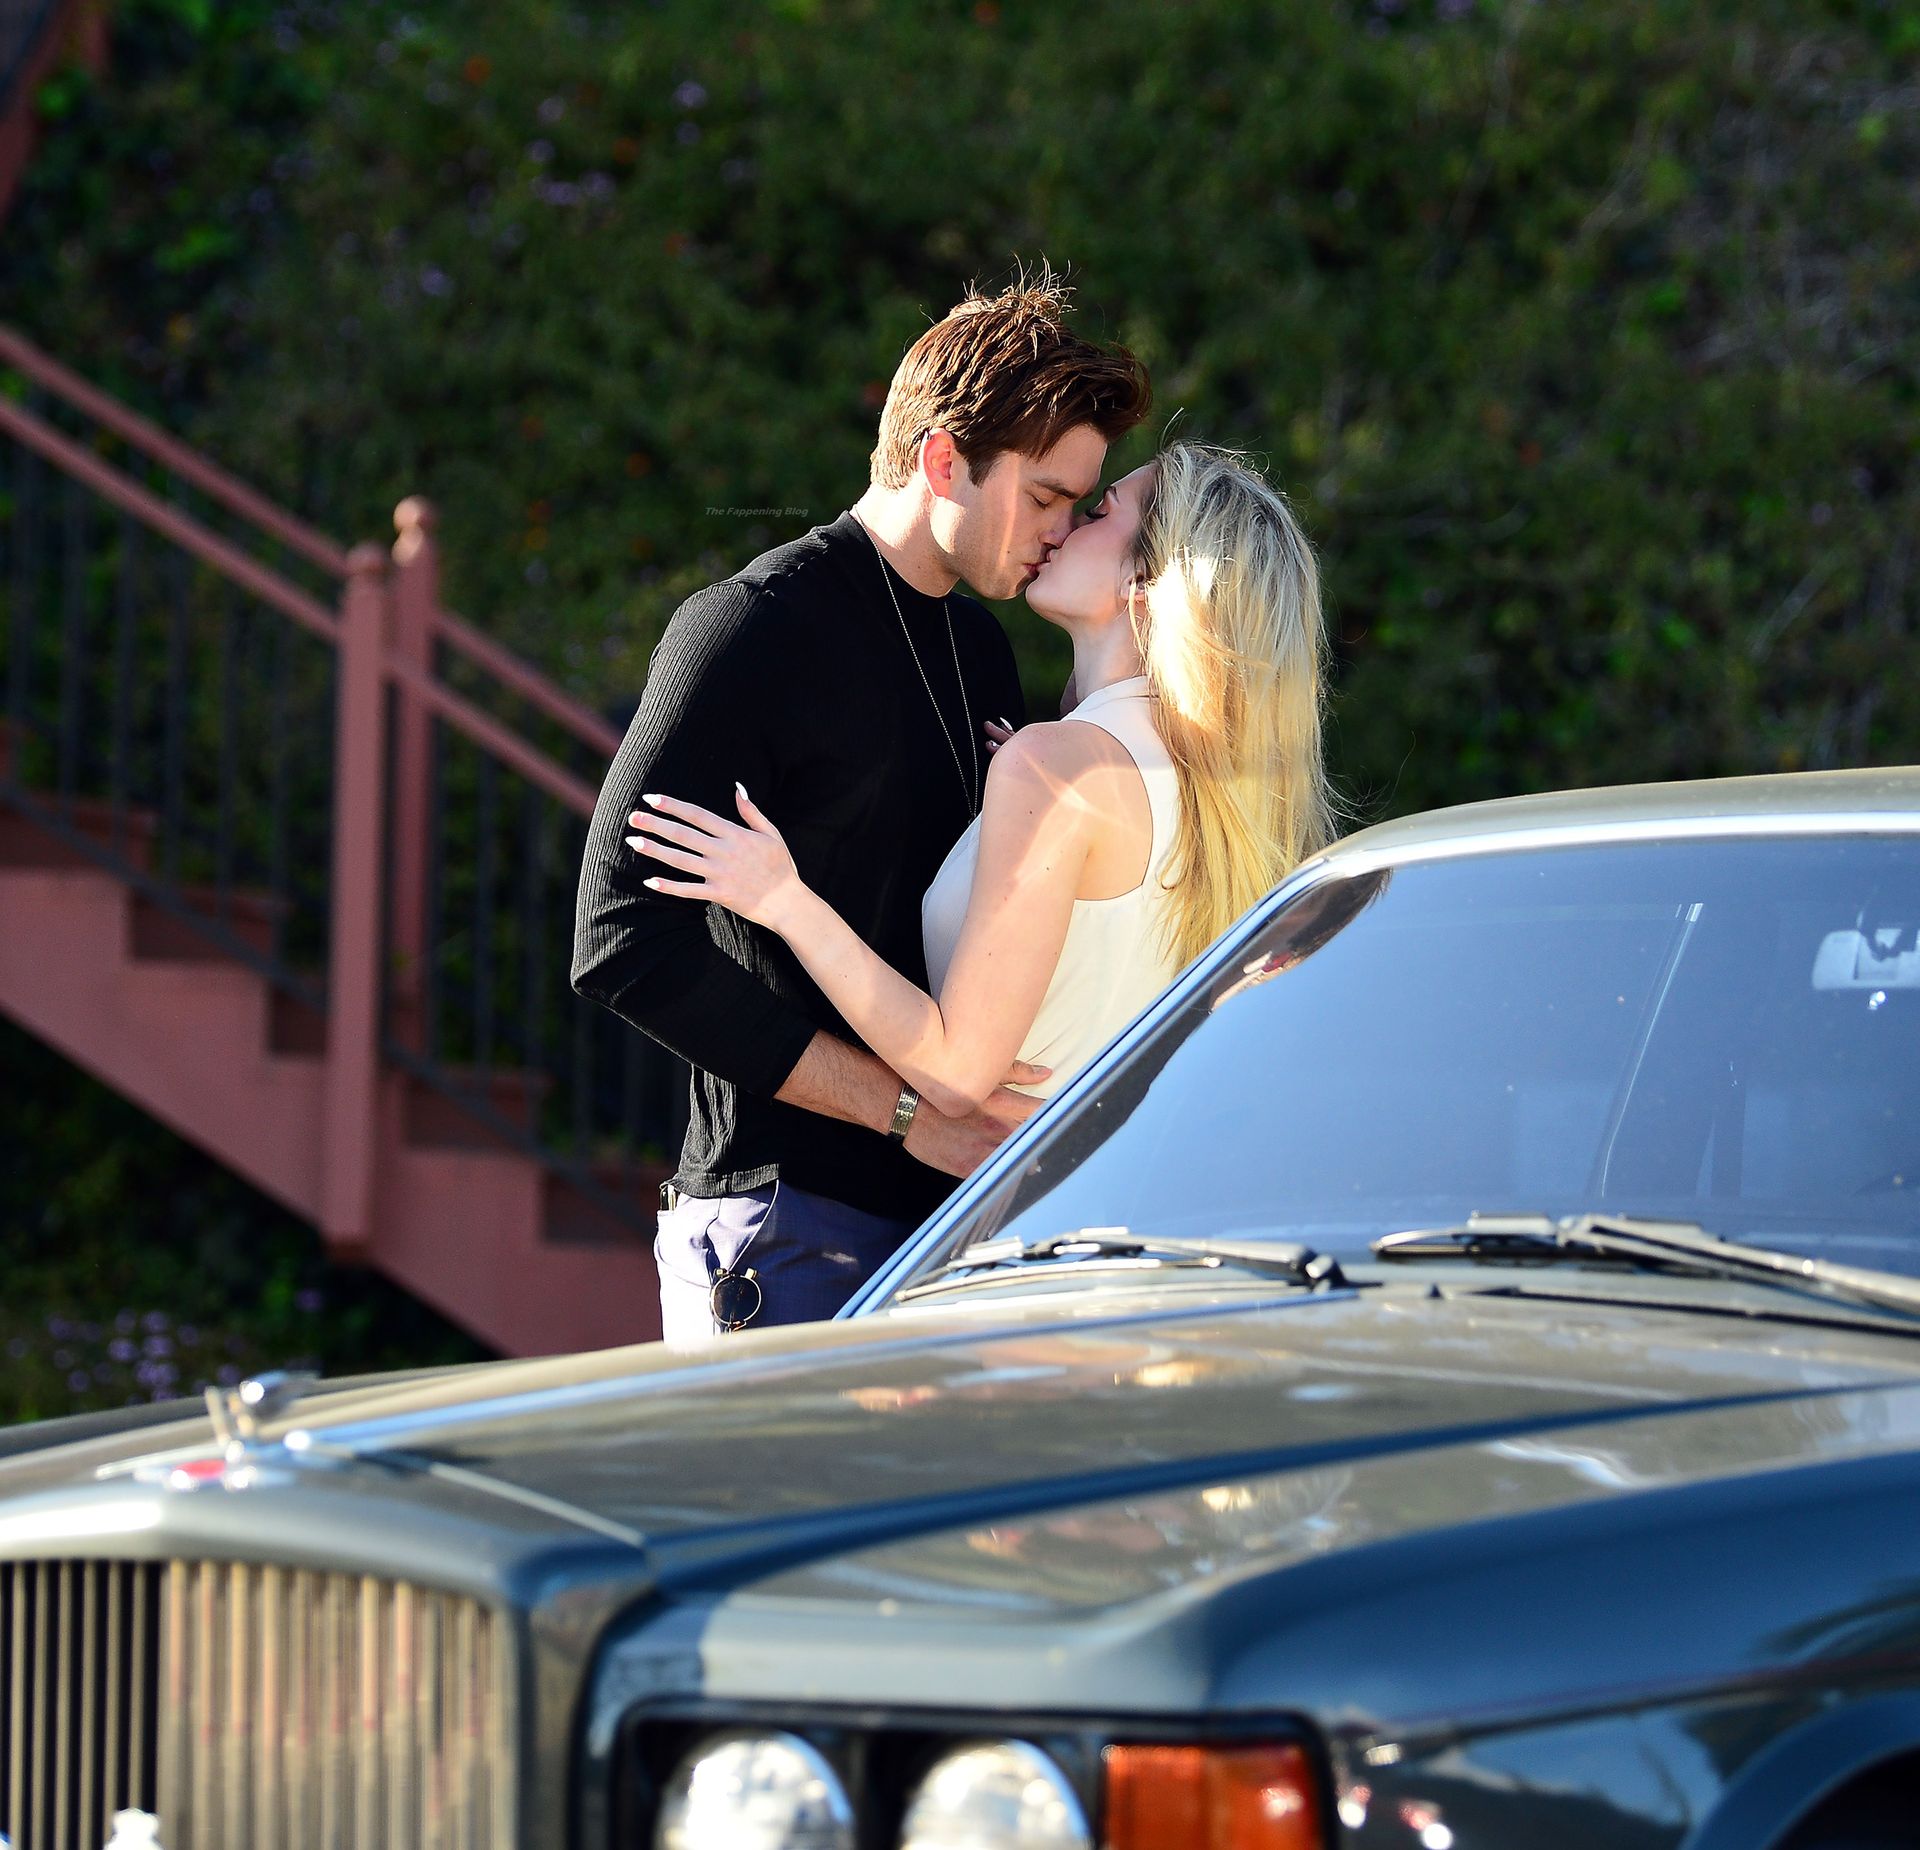 Saxon Sharbino & Pierson Fodé Pack on the PDA After a Romantic lunch in LA (15 Photos)